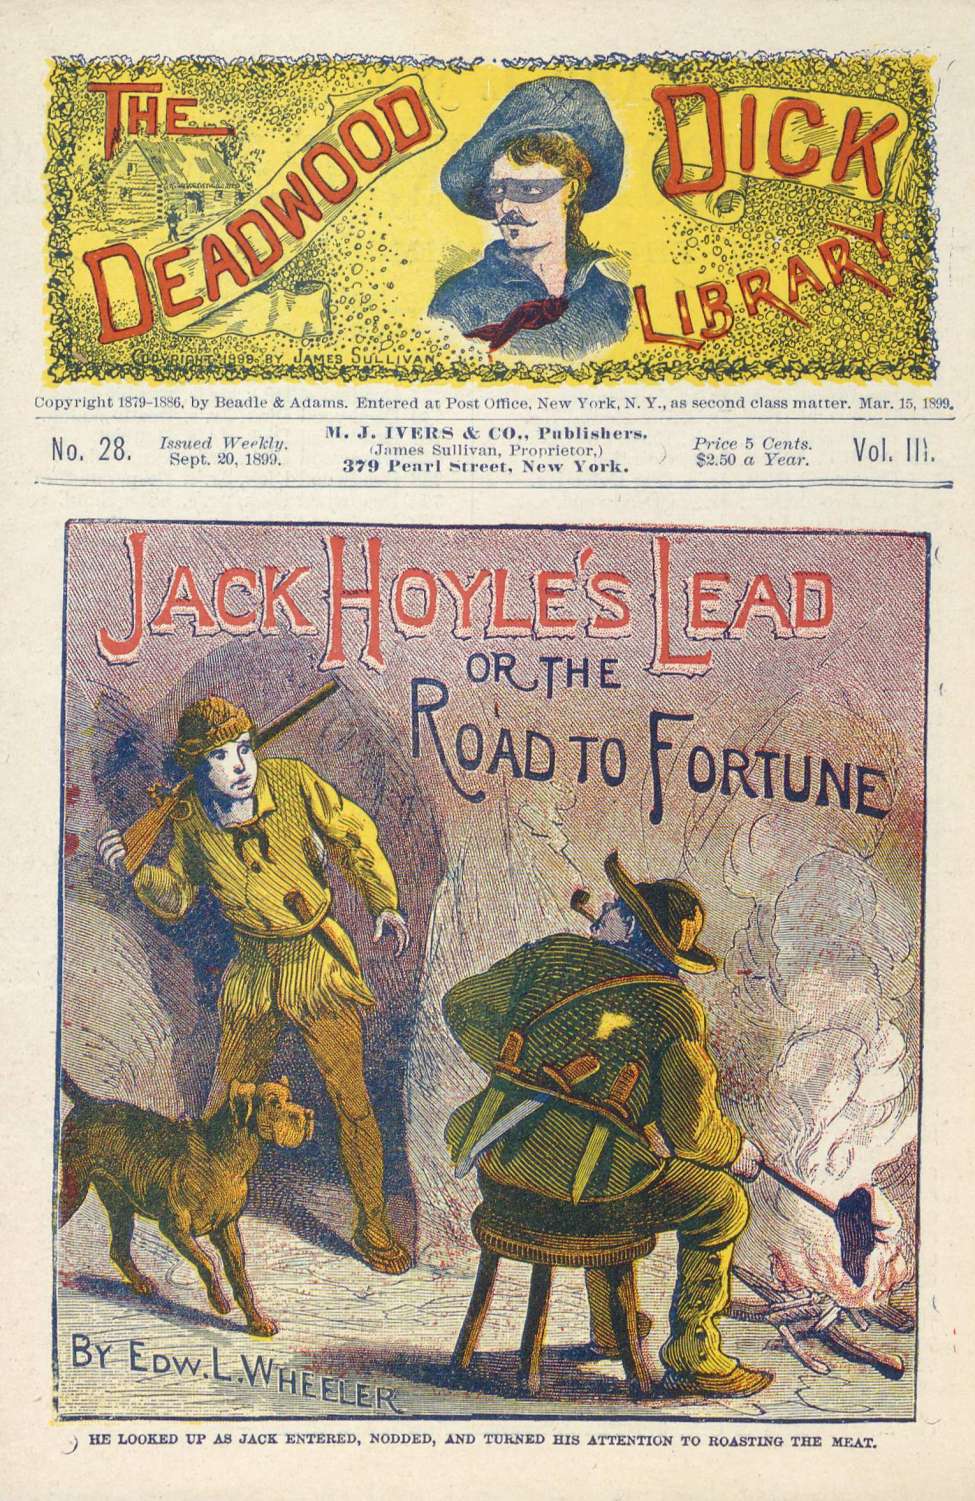 Book Cover For Deadwood Dick Library v2 28 - Jack Hoyle's Lead